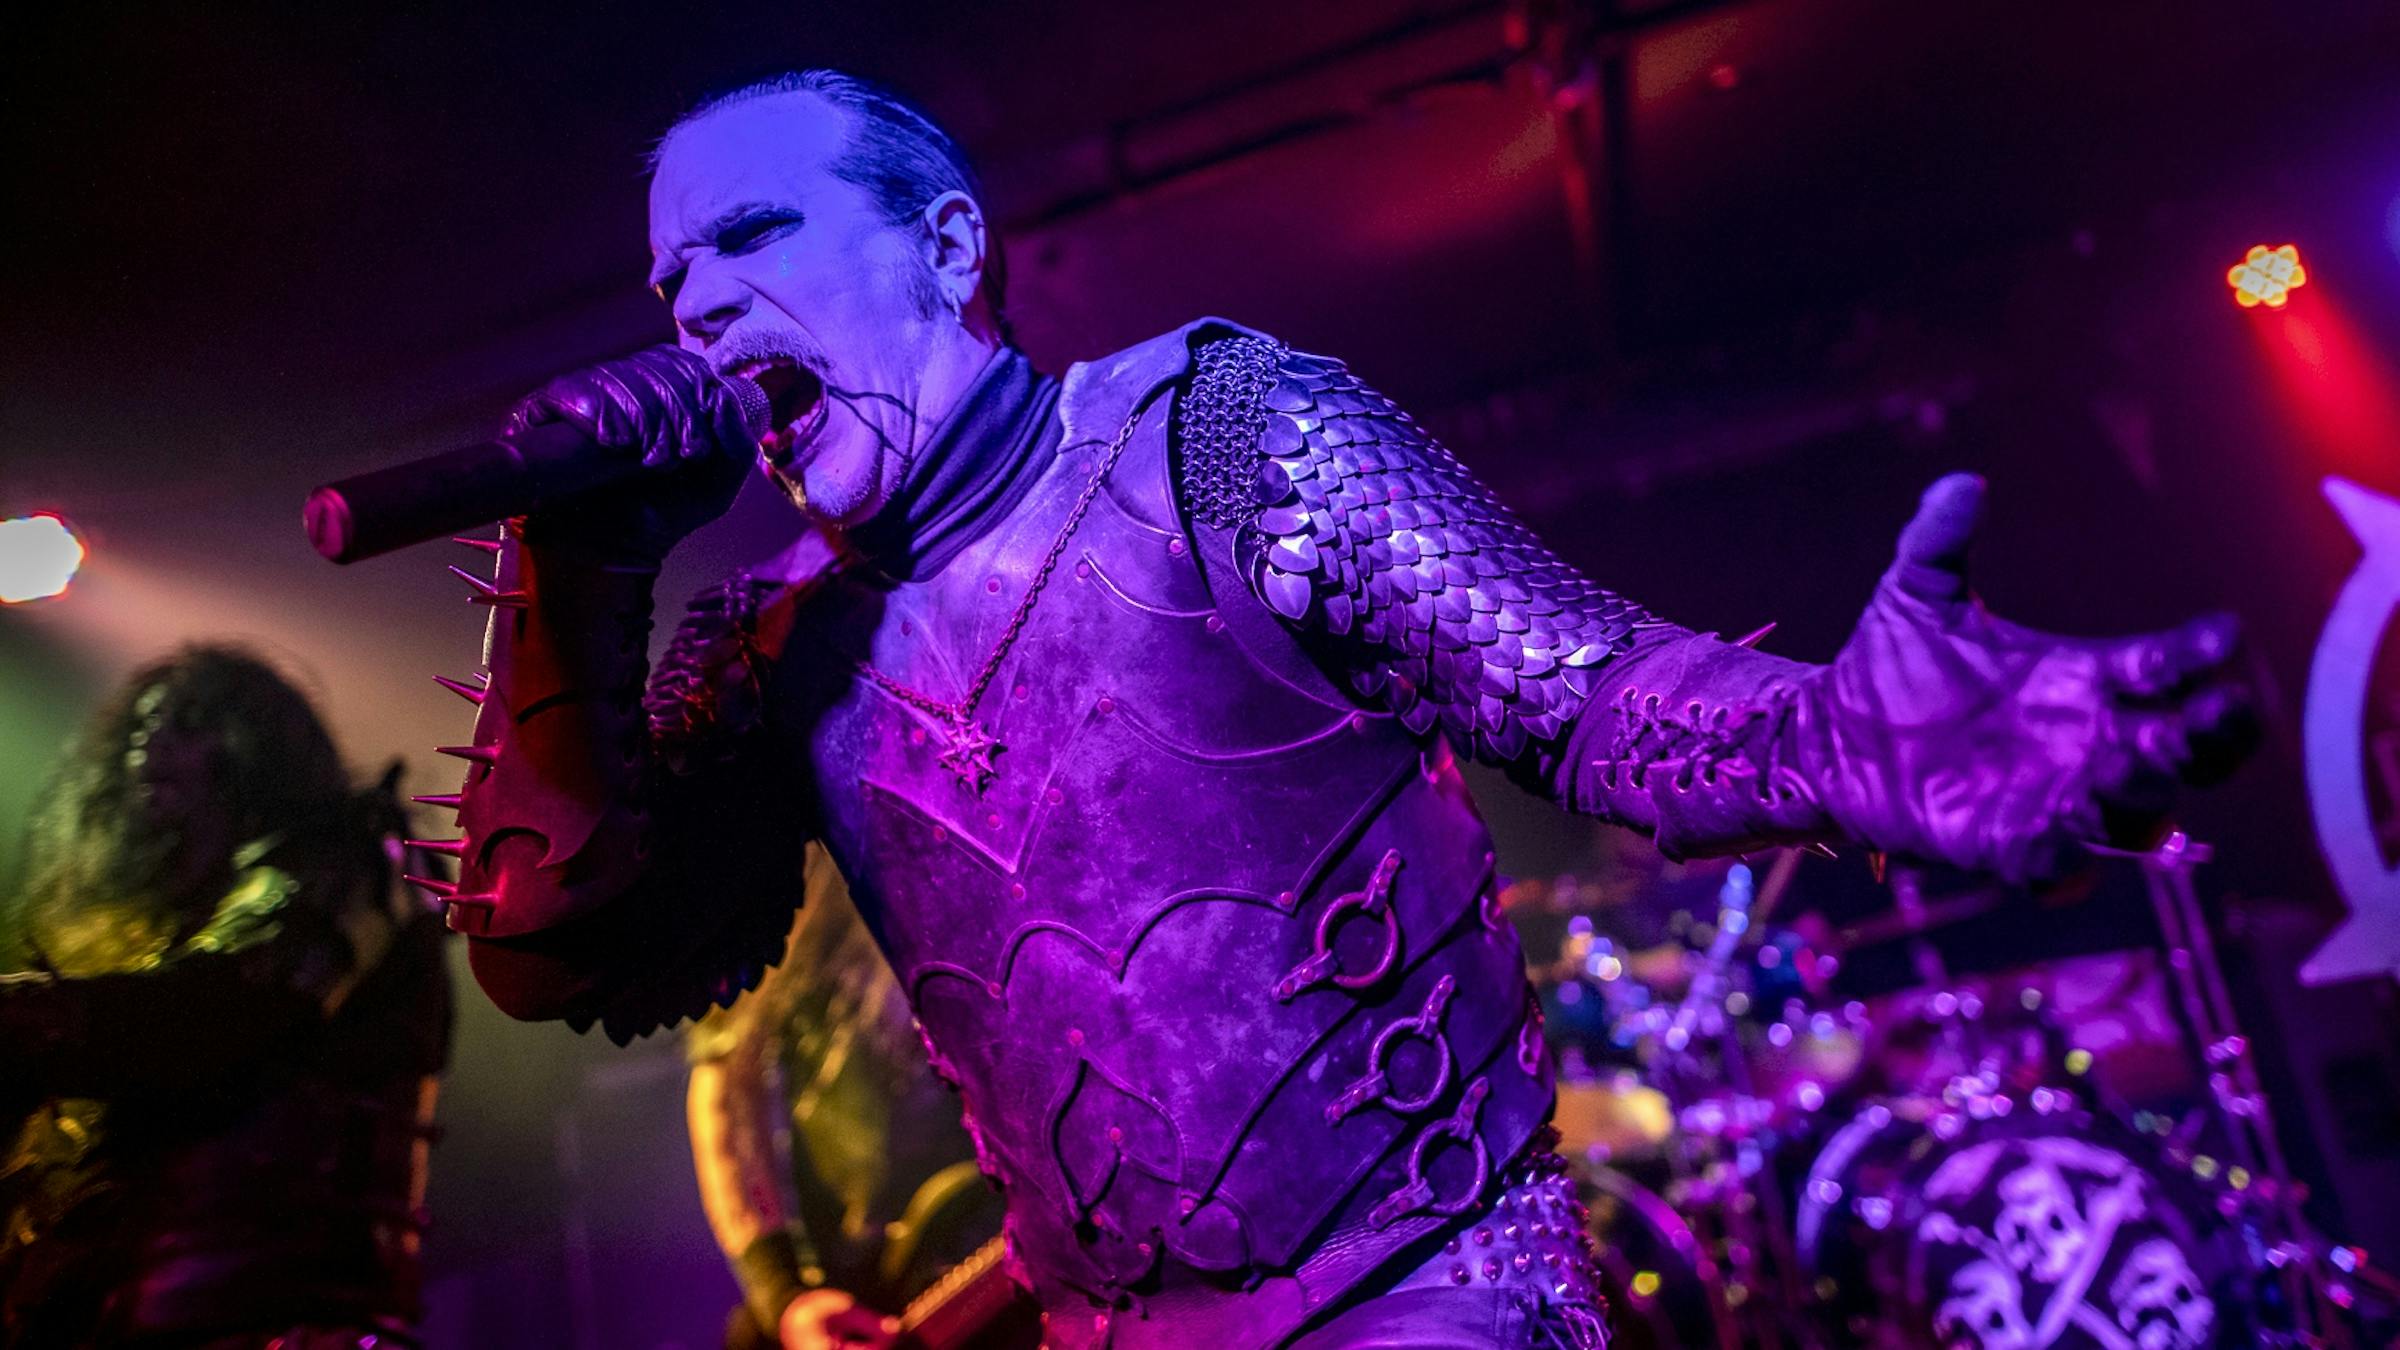 Dark Funeral And Belphegor Bring Bloody Satanic Warfare To The Masses